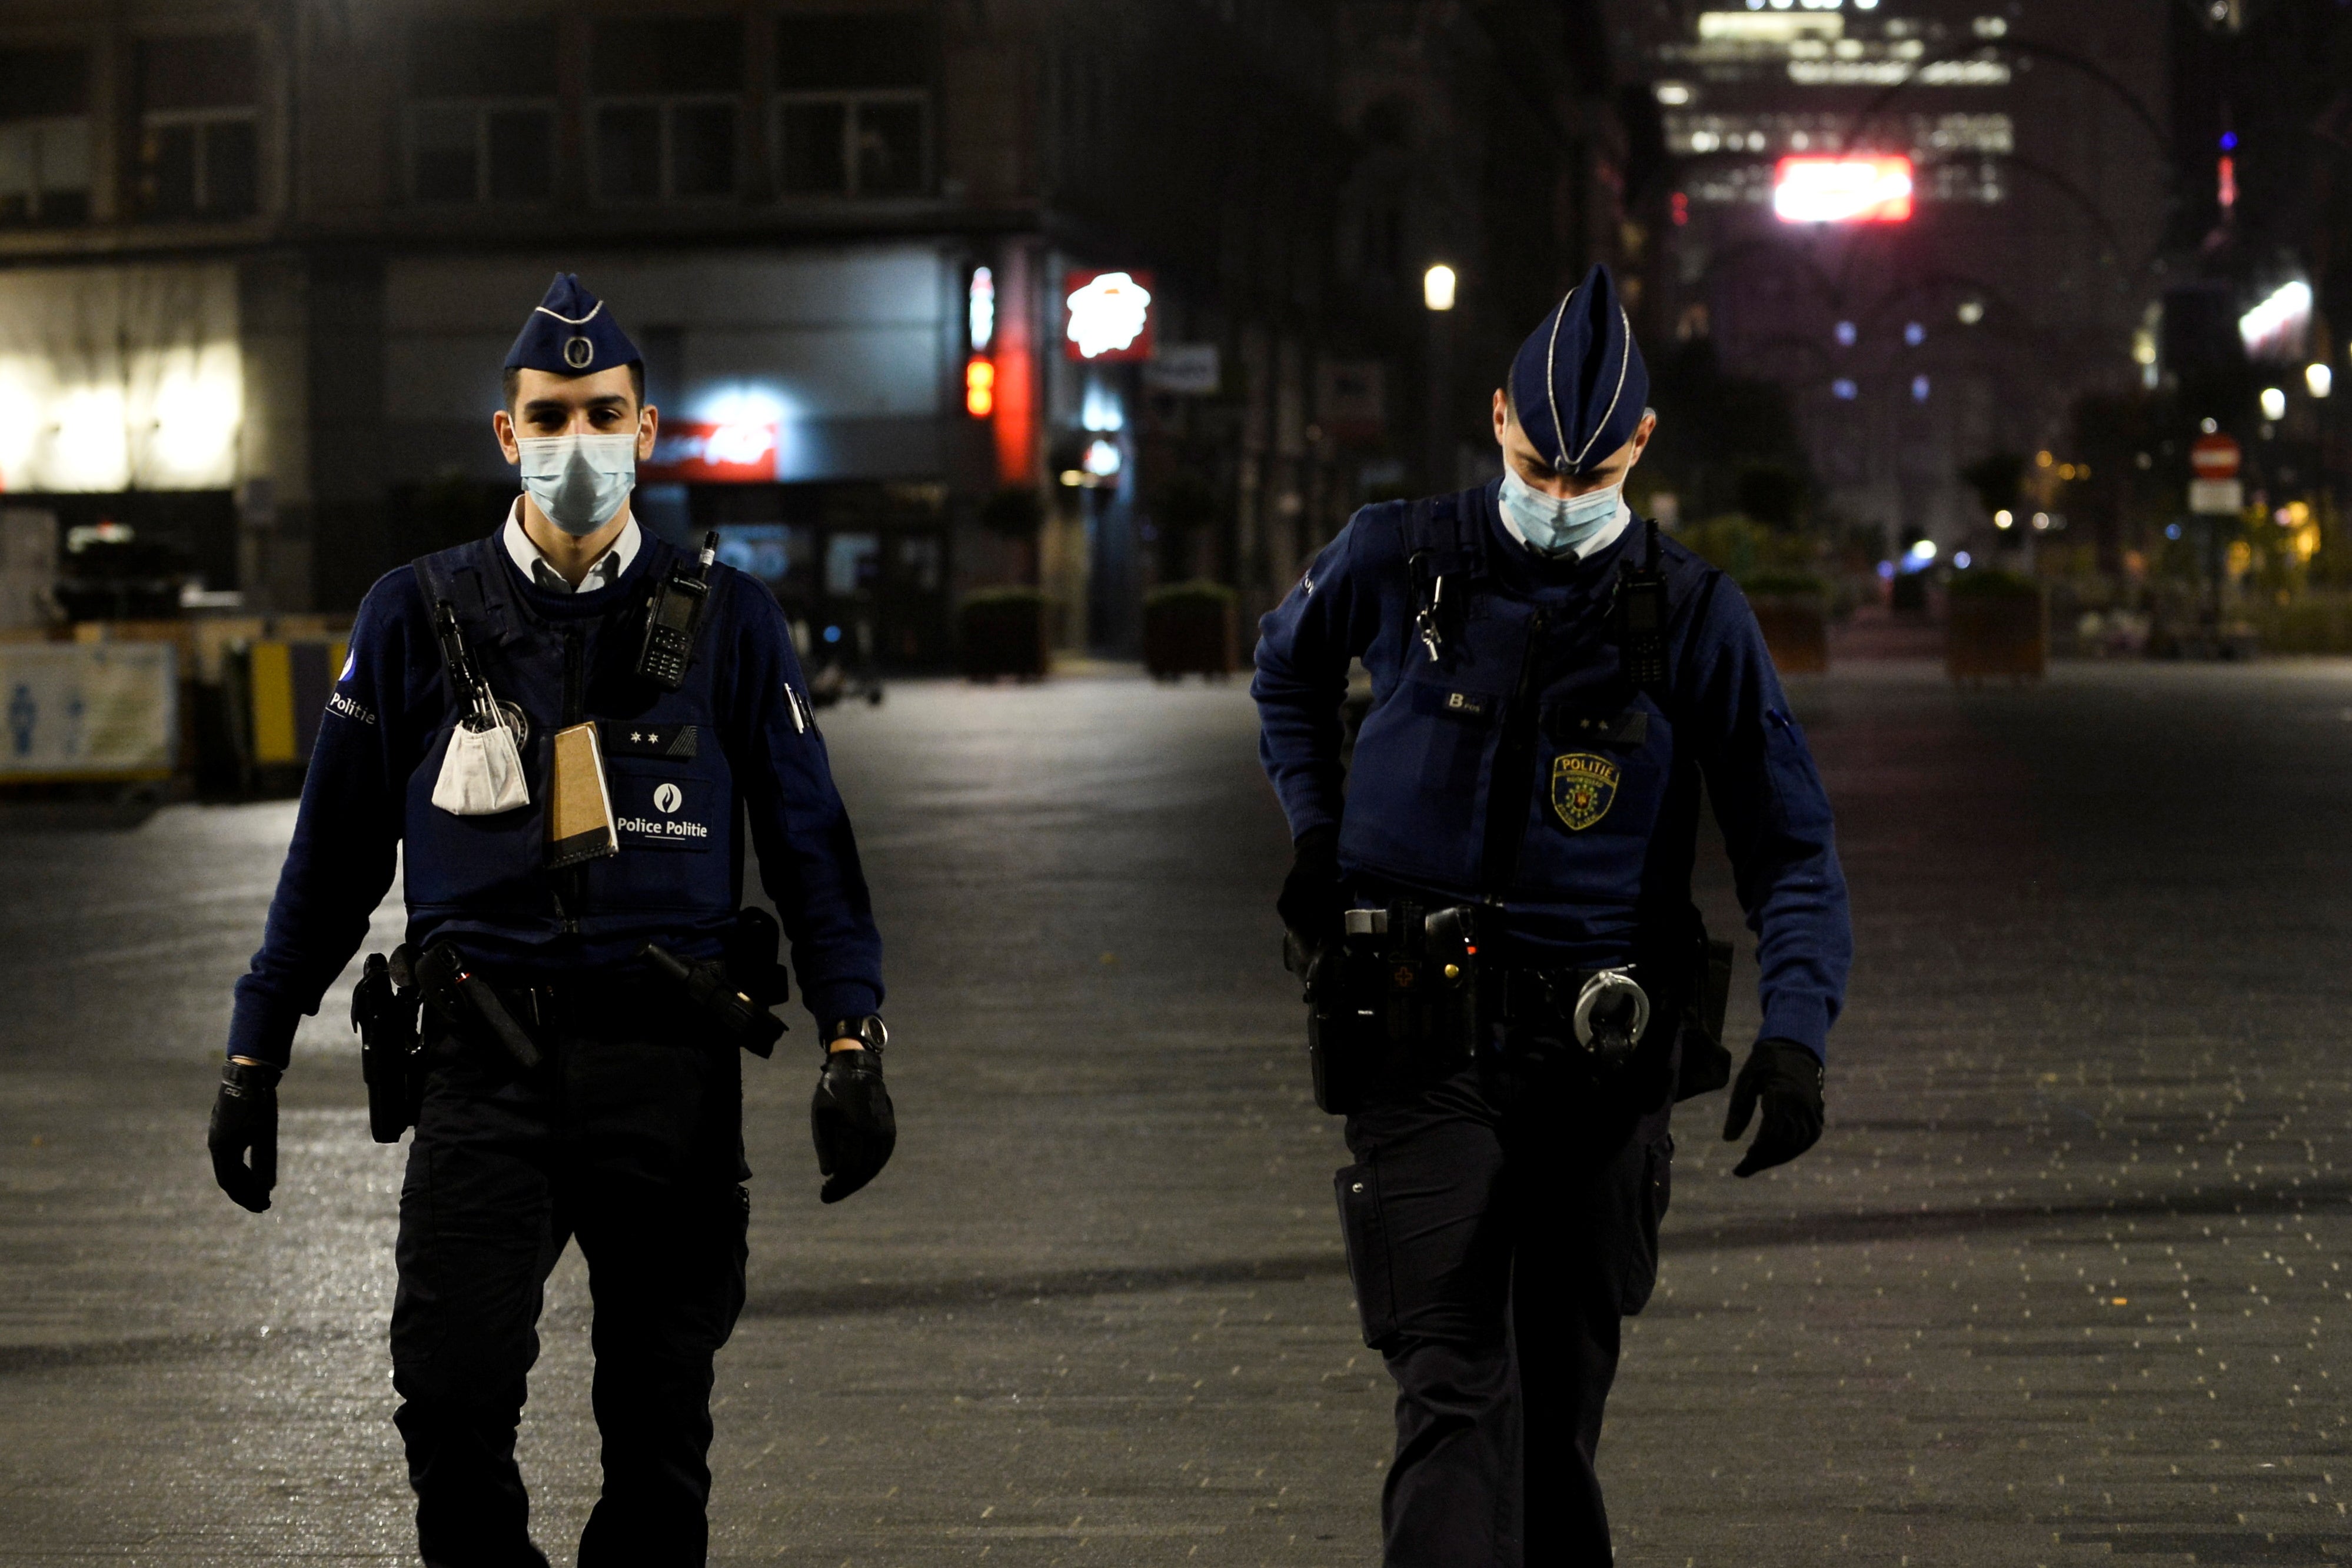 Belgian police break up 52 person orgy in a house next door to a Covid clinic The Independent pic